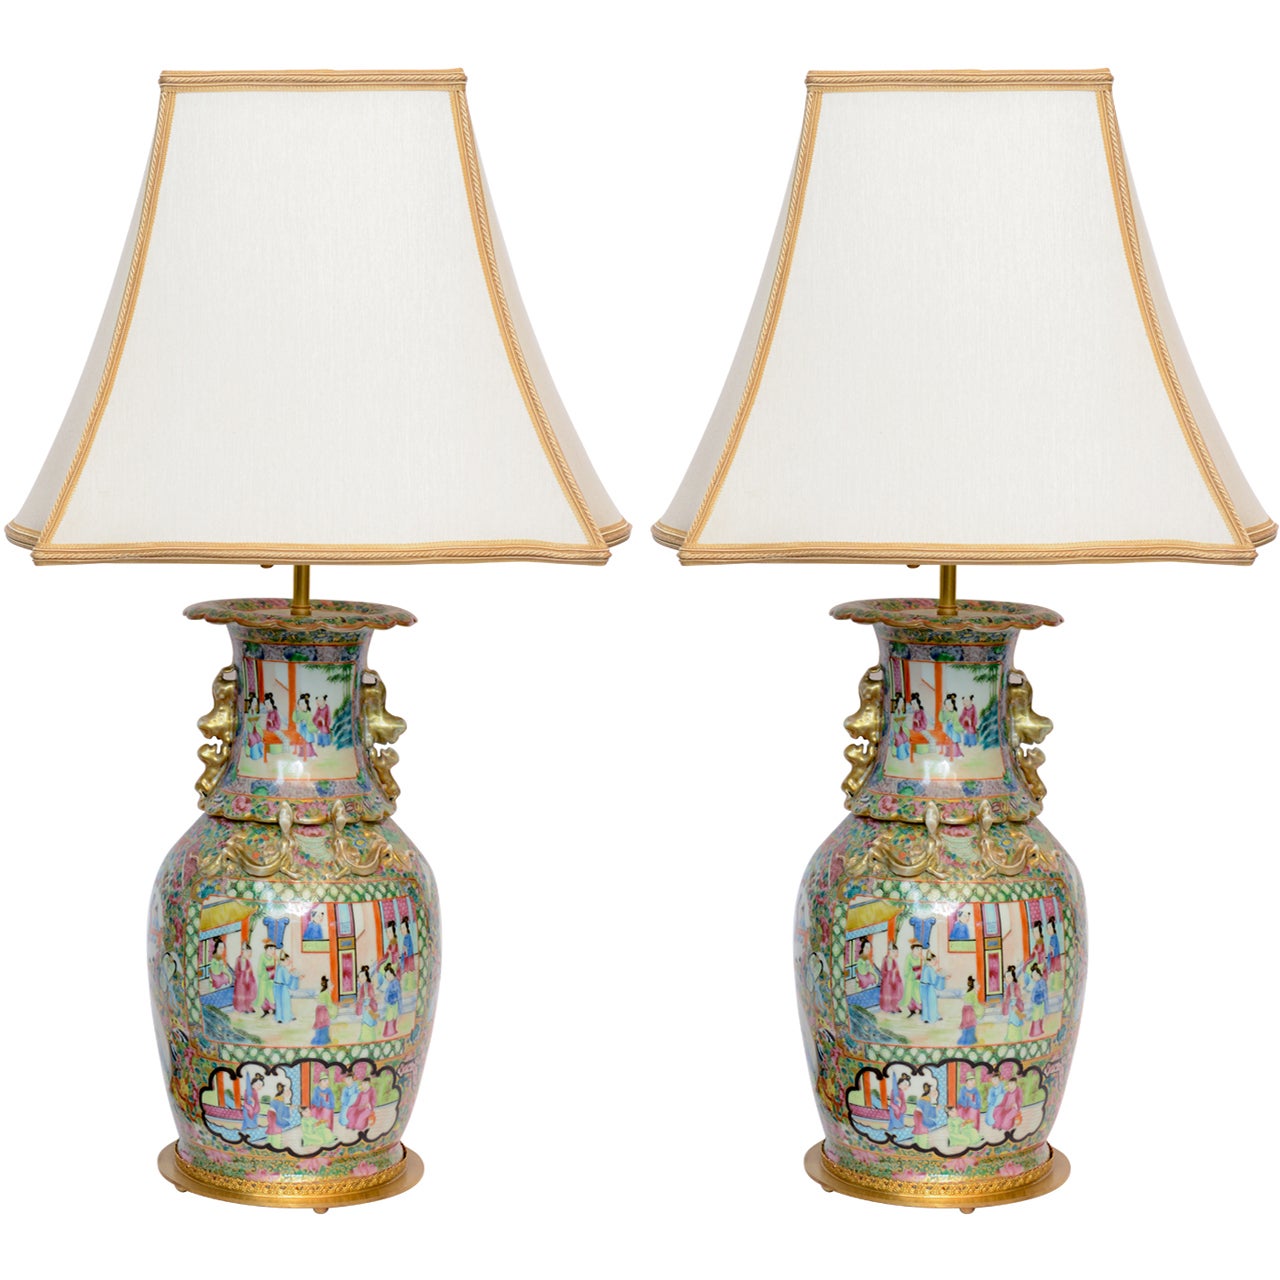 A Pair Of 19th Century  Chinese Porcelain Rose Medallion Lamps.